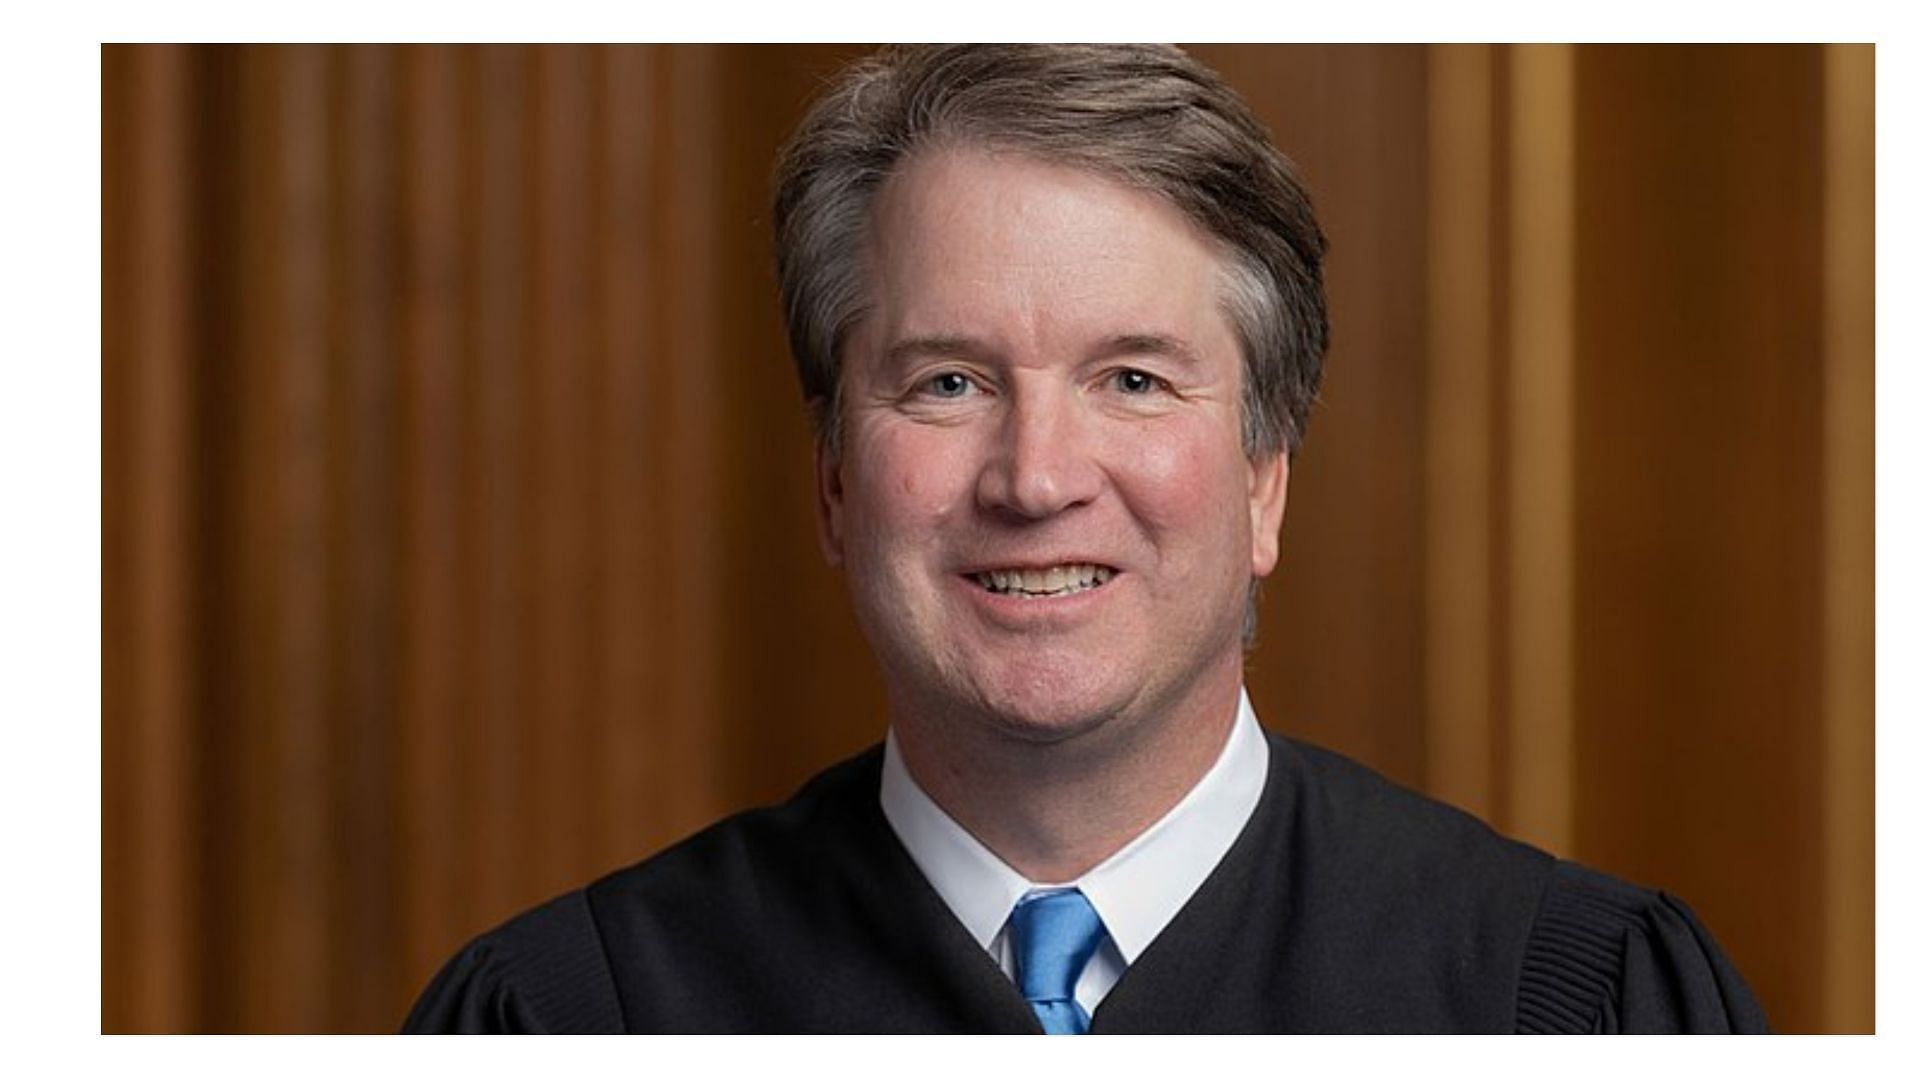 The suspect begged 911 operators for professional mental health treatment after allegedly attempting to murder Brett Kavanaugh (image via Fred Schilling/American Supreme Court)